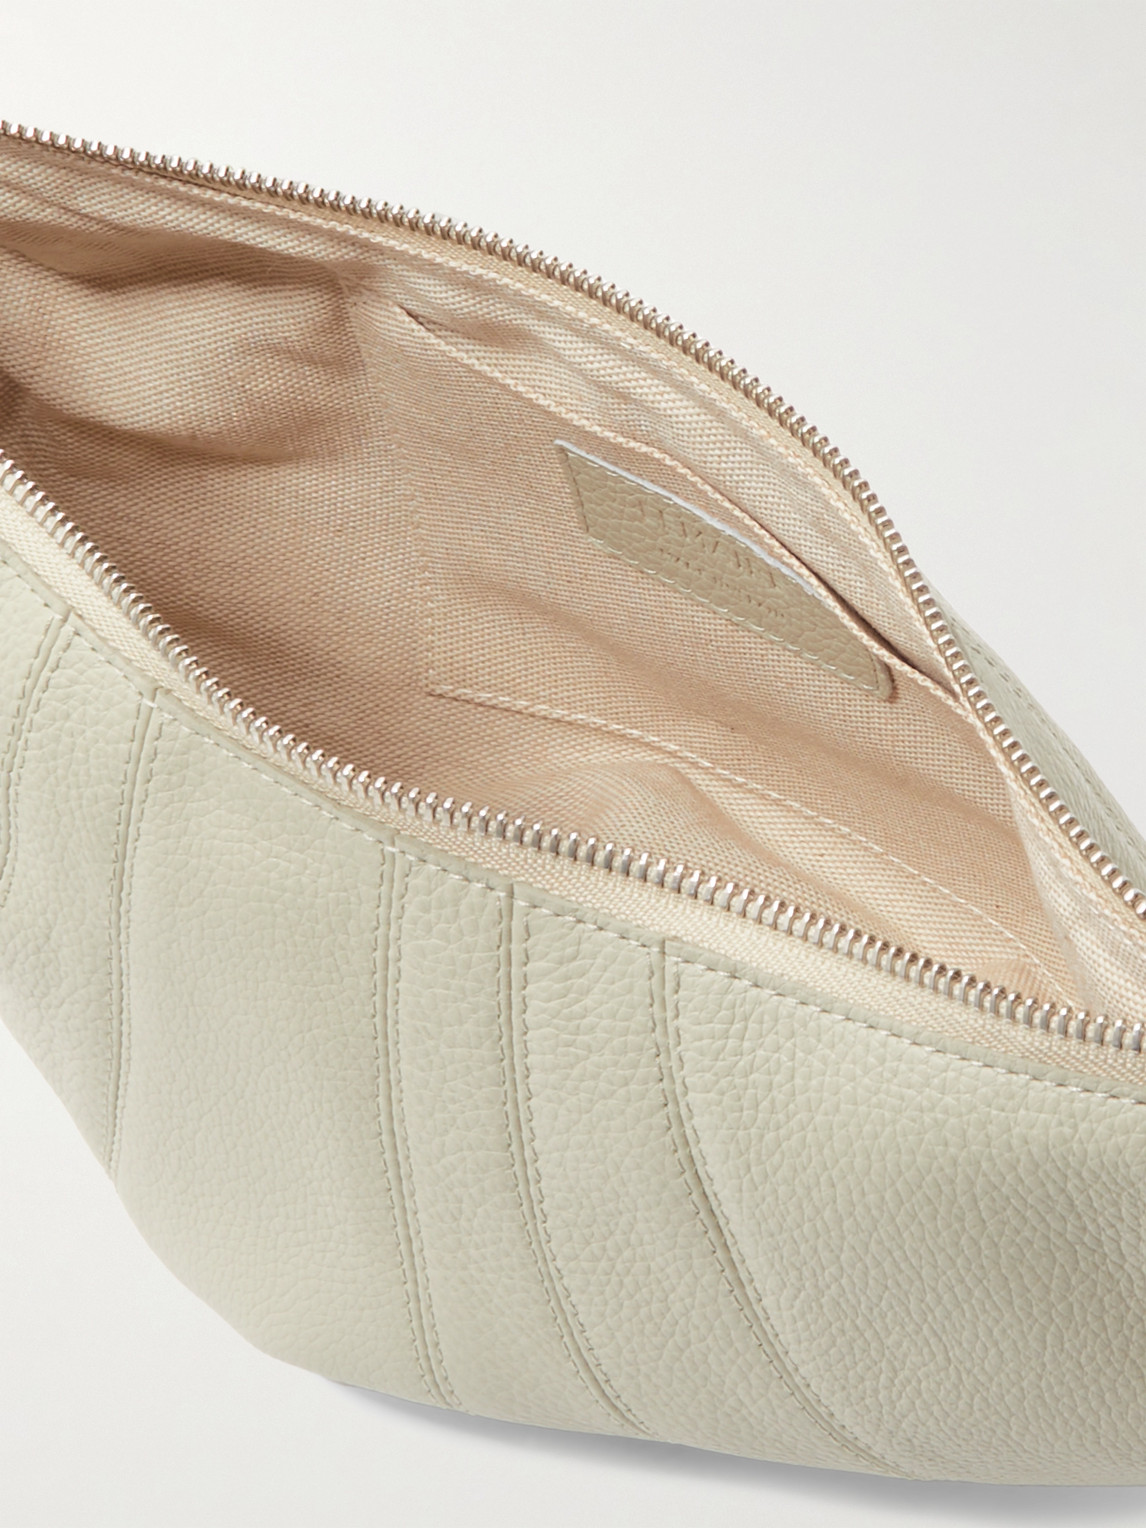 Shop Lemaire Croissant Small Full-grain Leather Messenger Bag In Neutrals